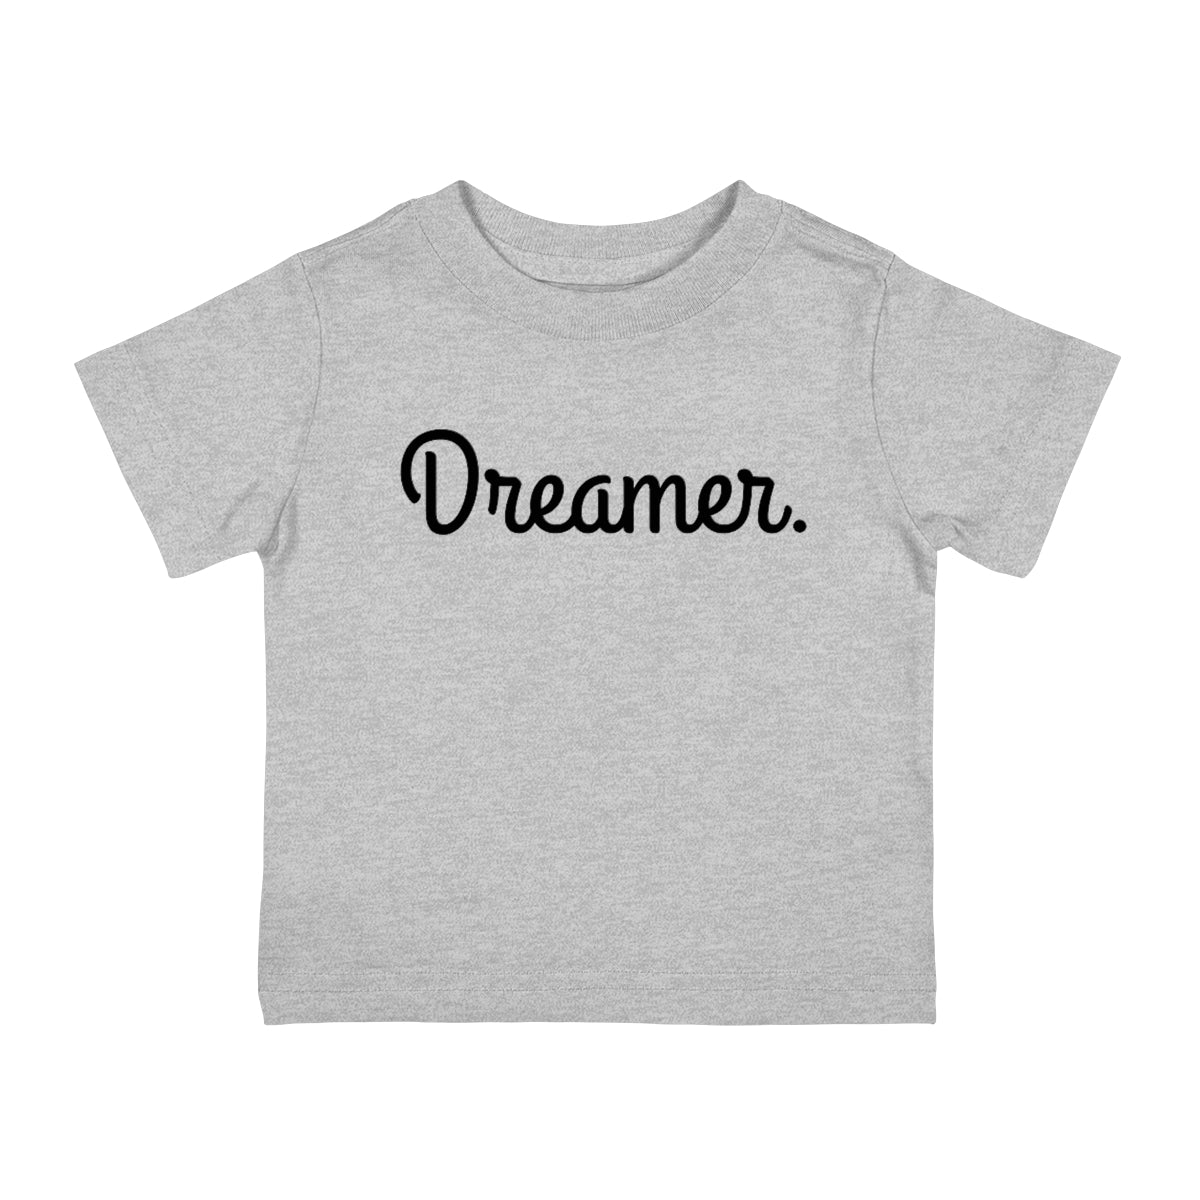 Dreamer. Infant Cotton Jersey Tee